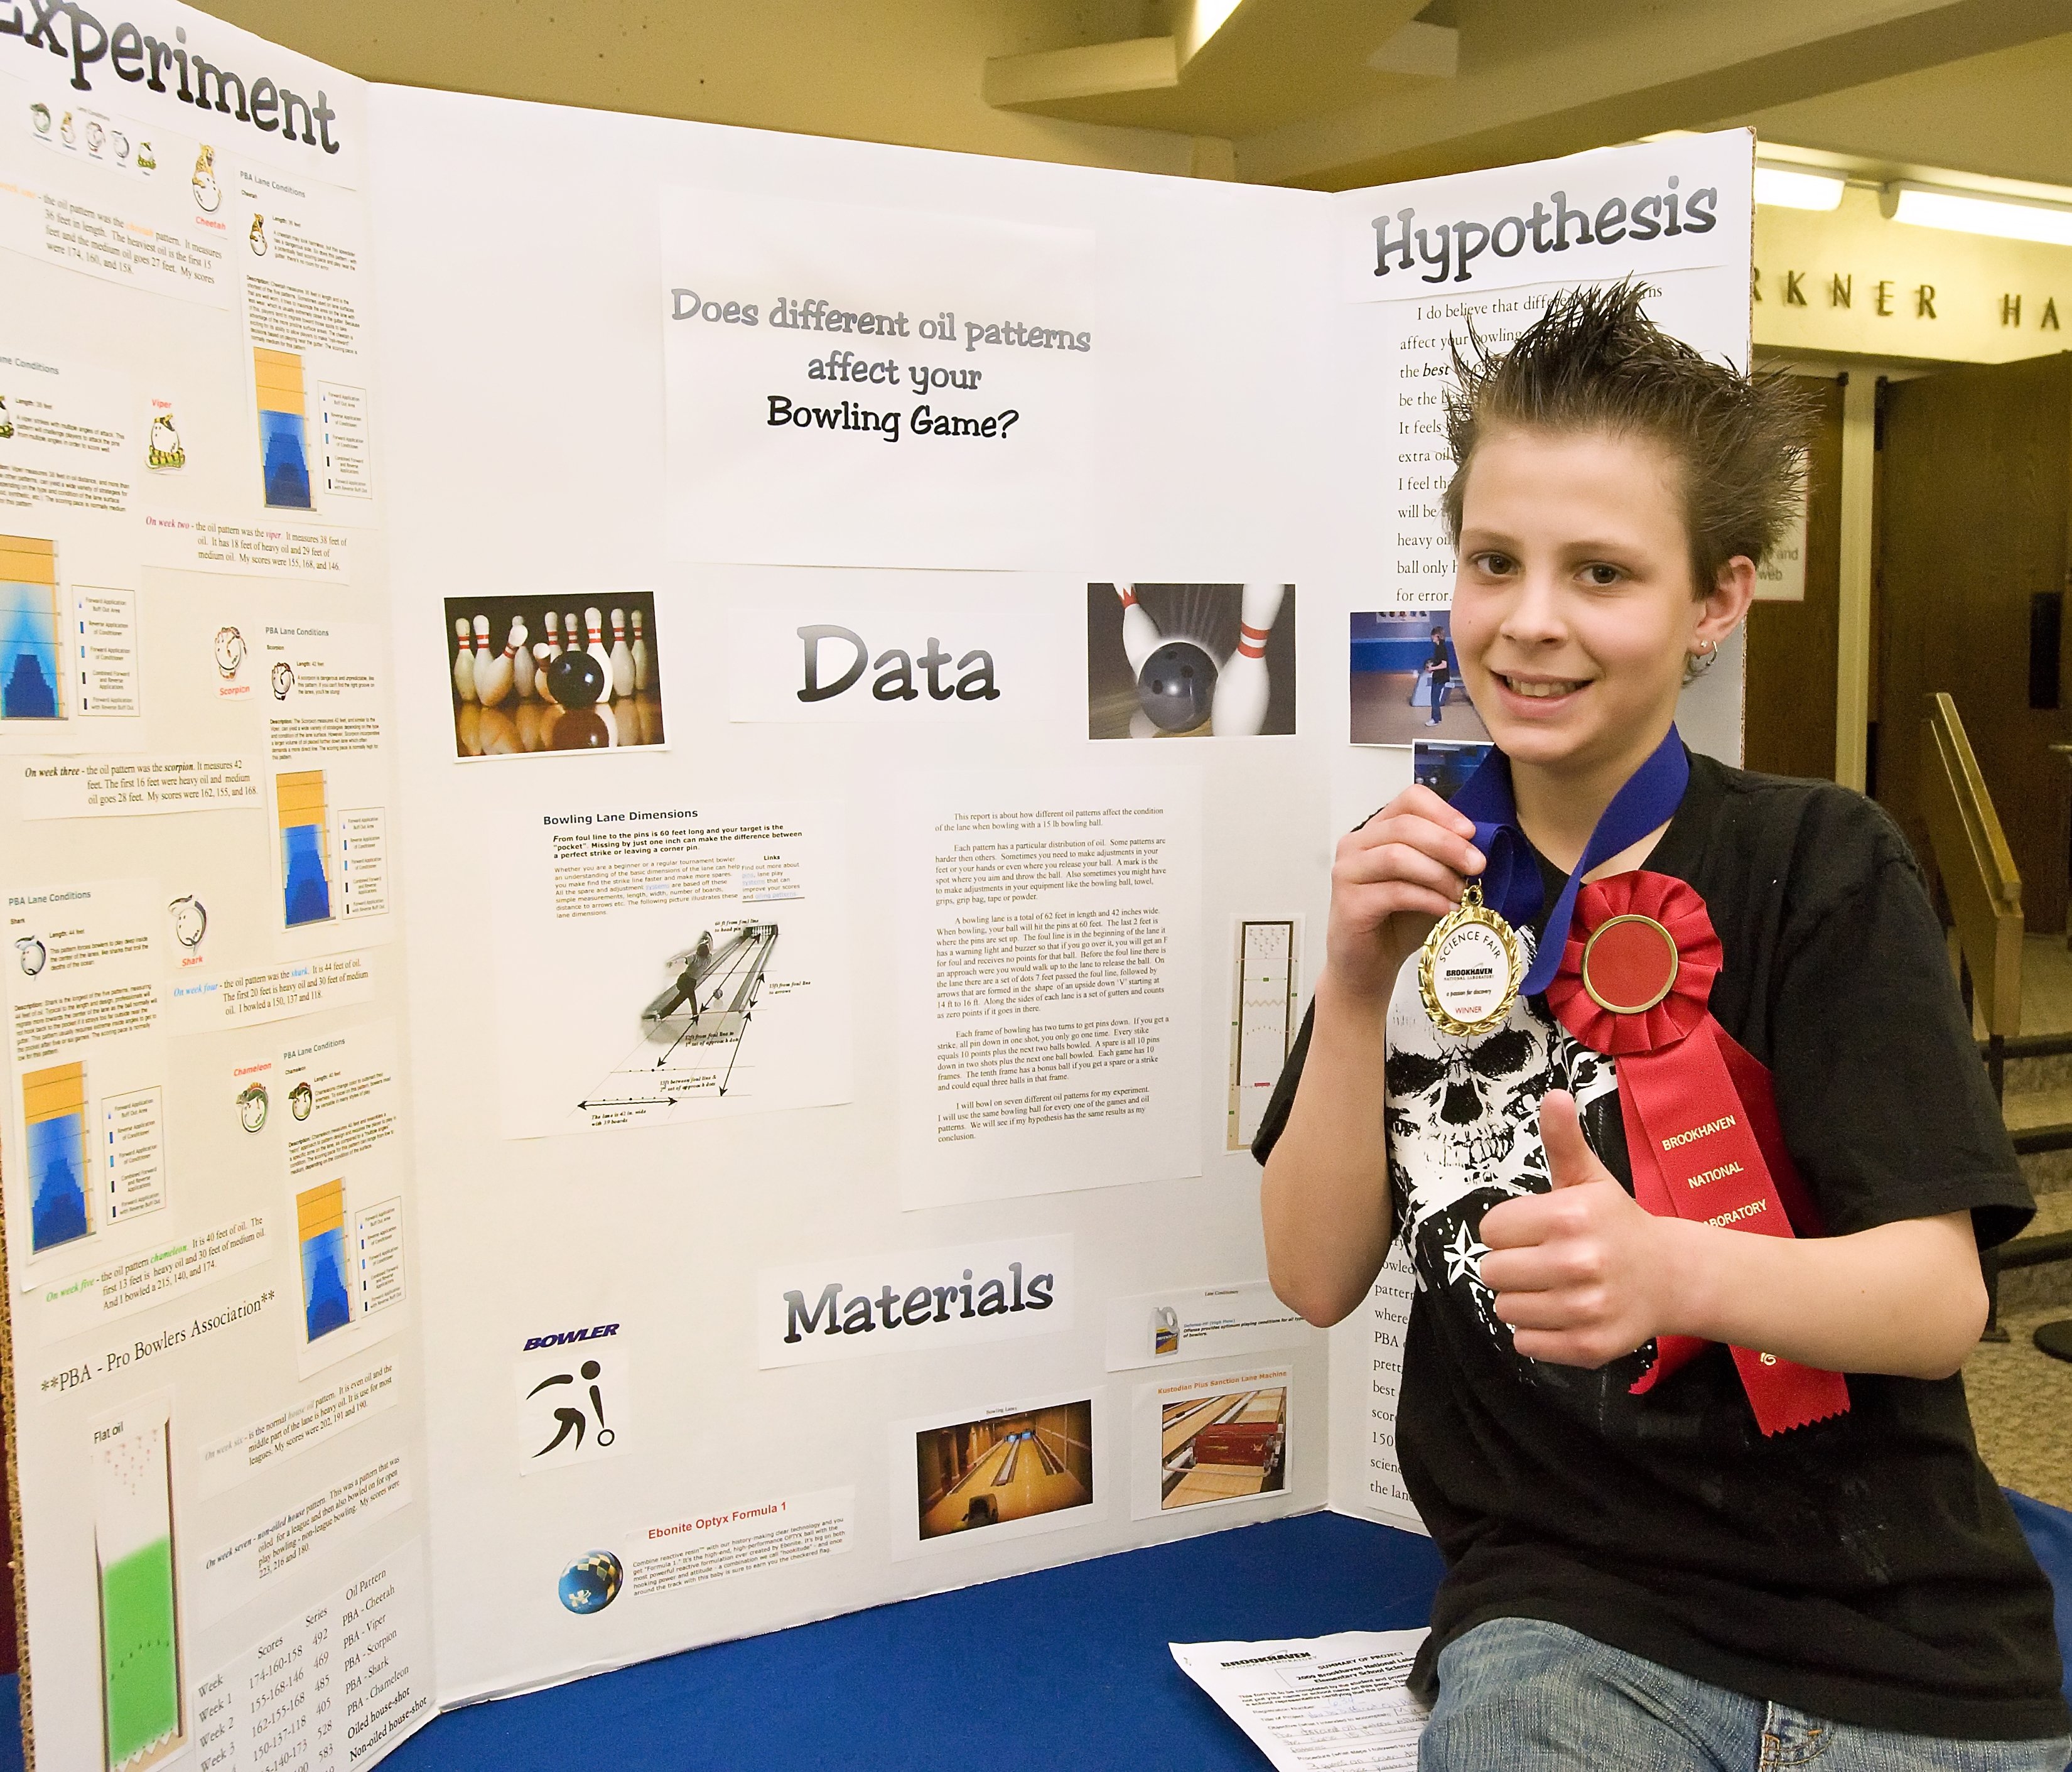 10 Amazing Ideas For Science Fair Projects For 6Th Grade from ant control to wind energy winning projects at brookhaven 5 2022